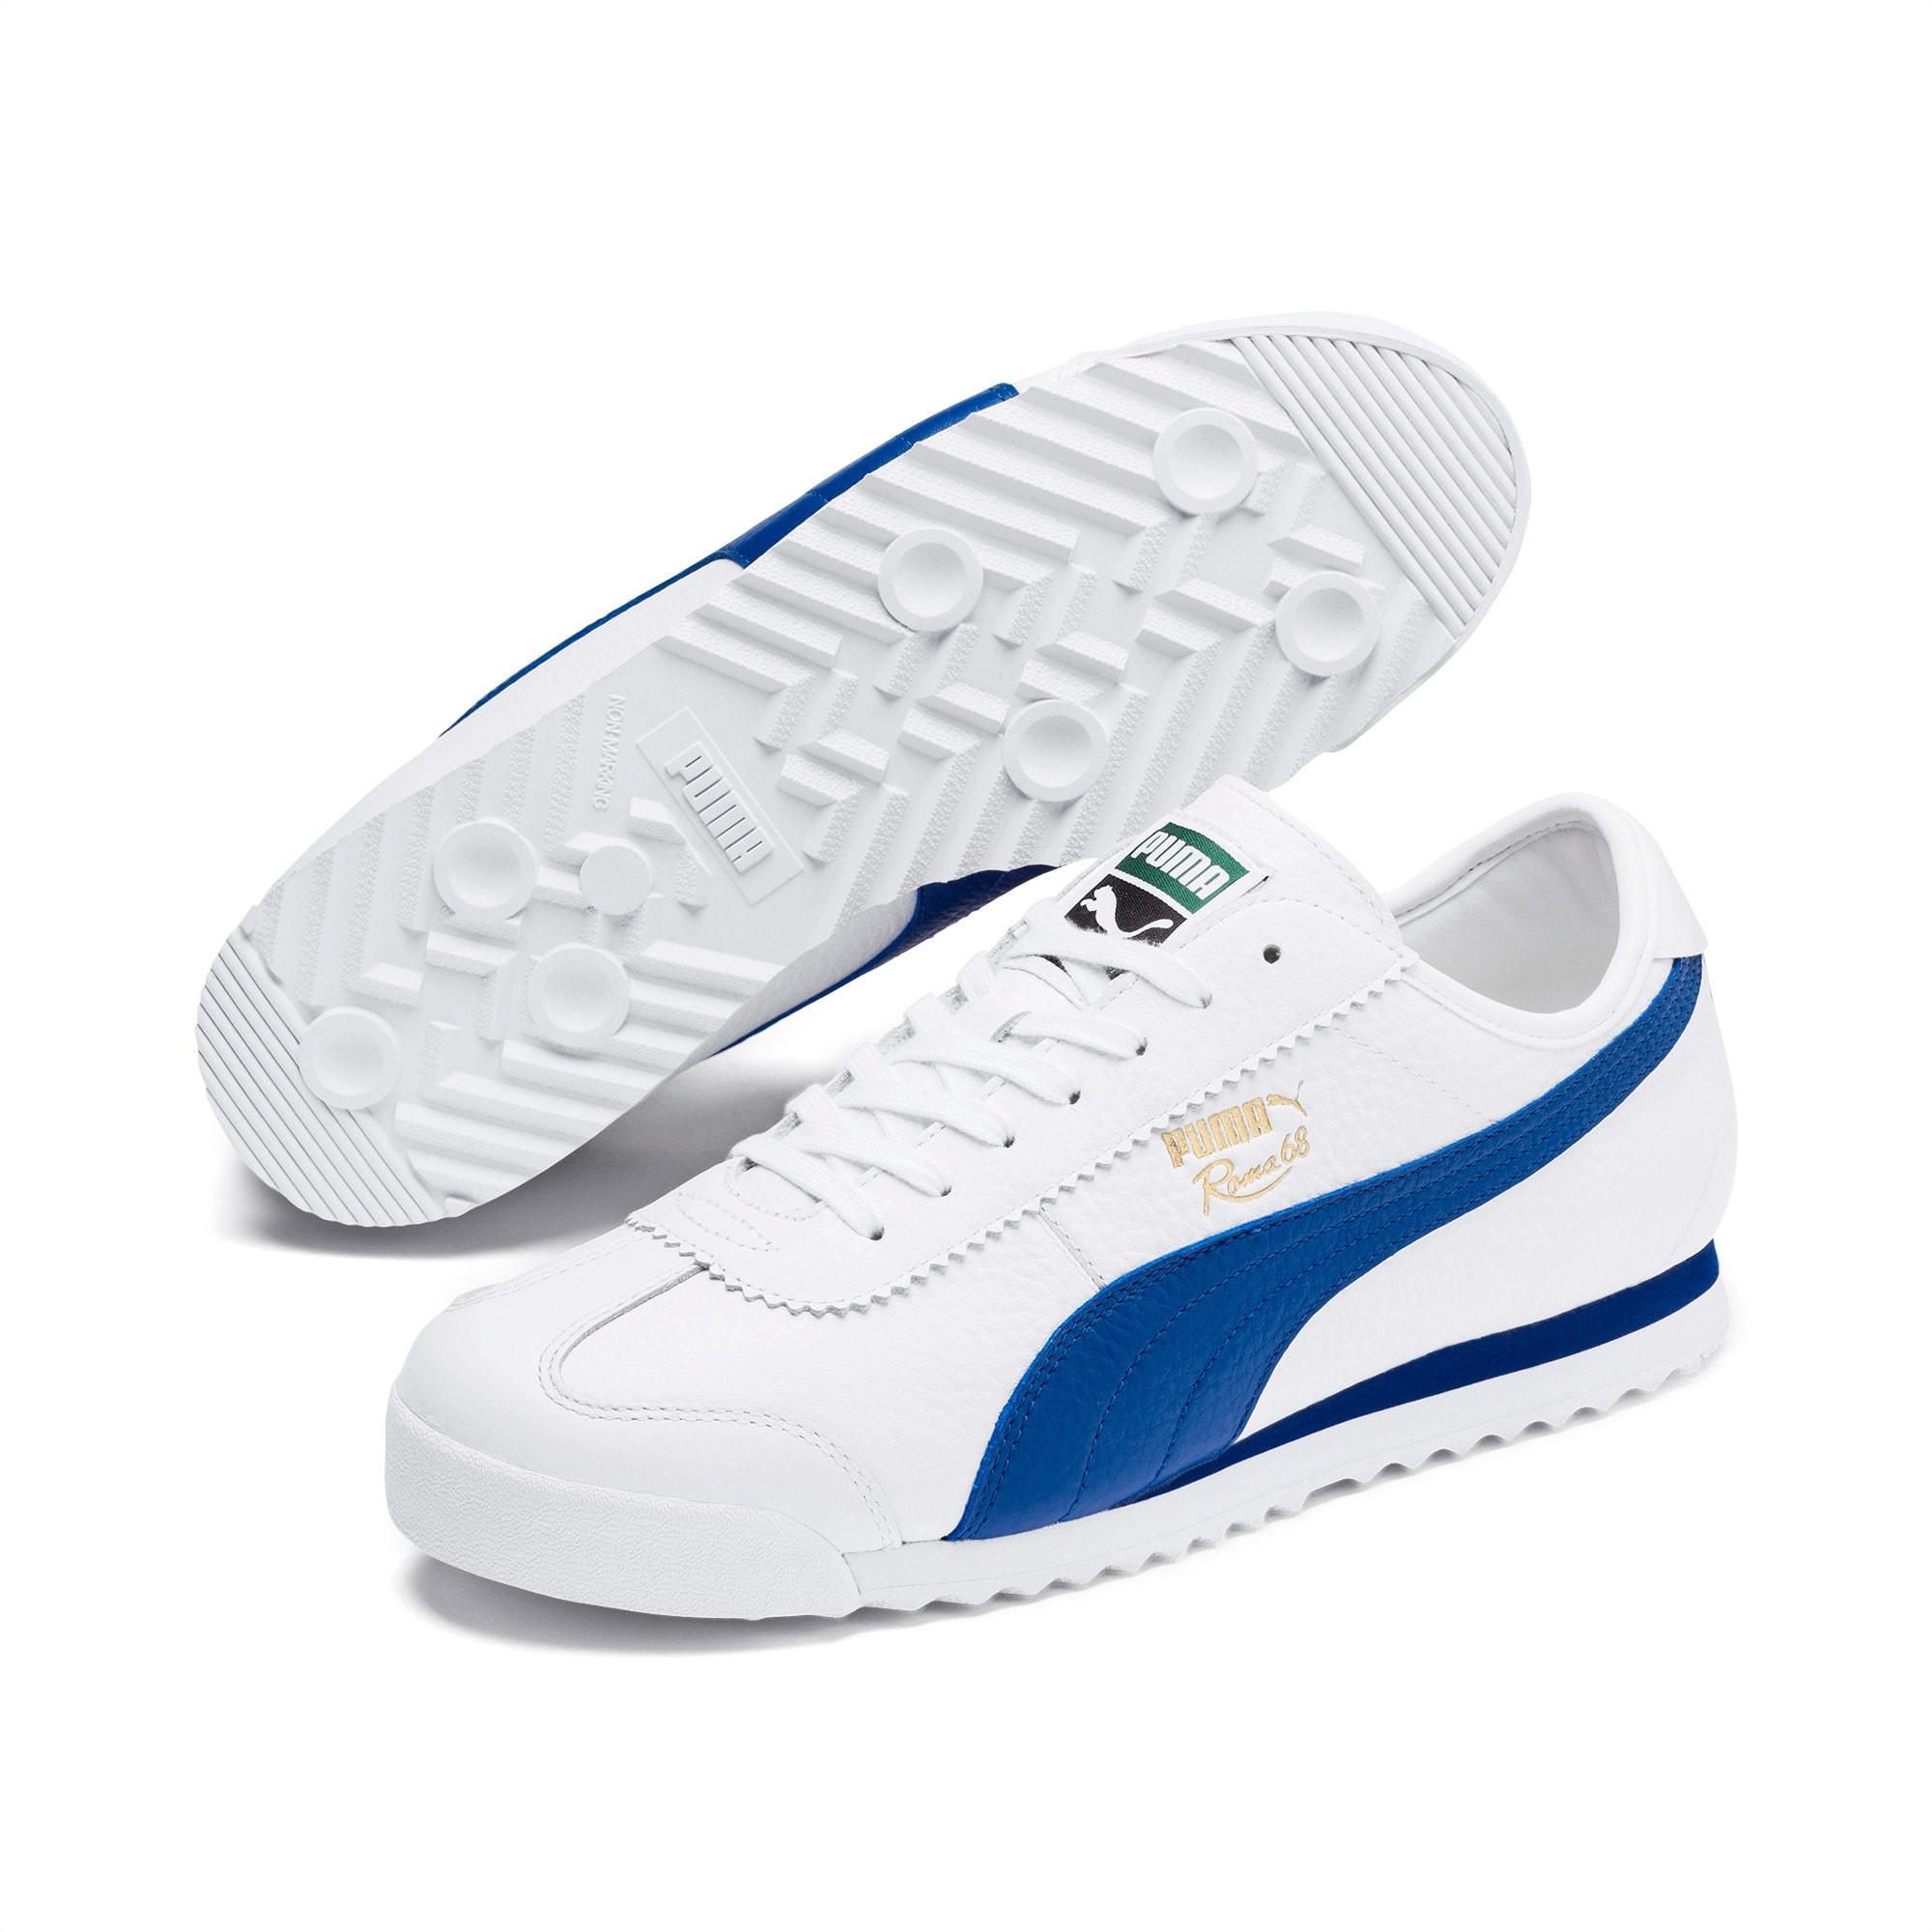 PUMA Leather Roma '68 Vintage Sneakers in 01 (Blue) for Men - Lyst